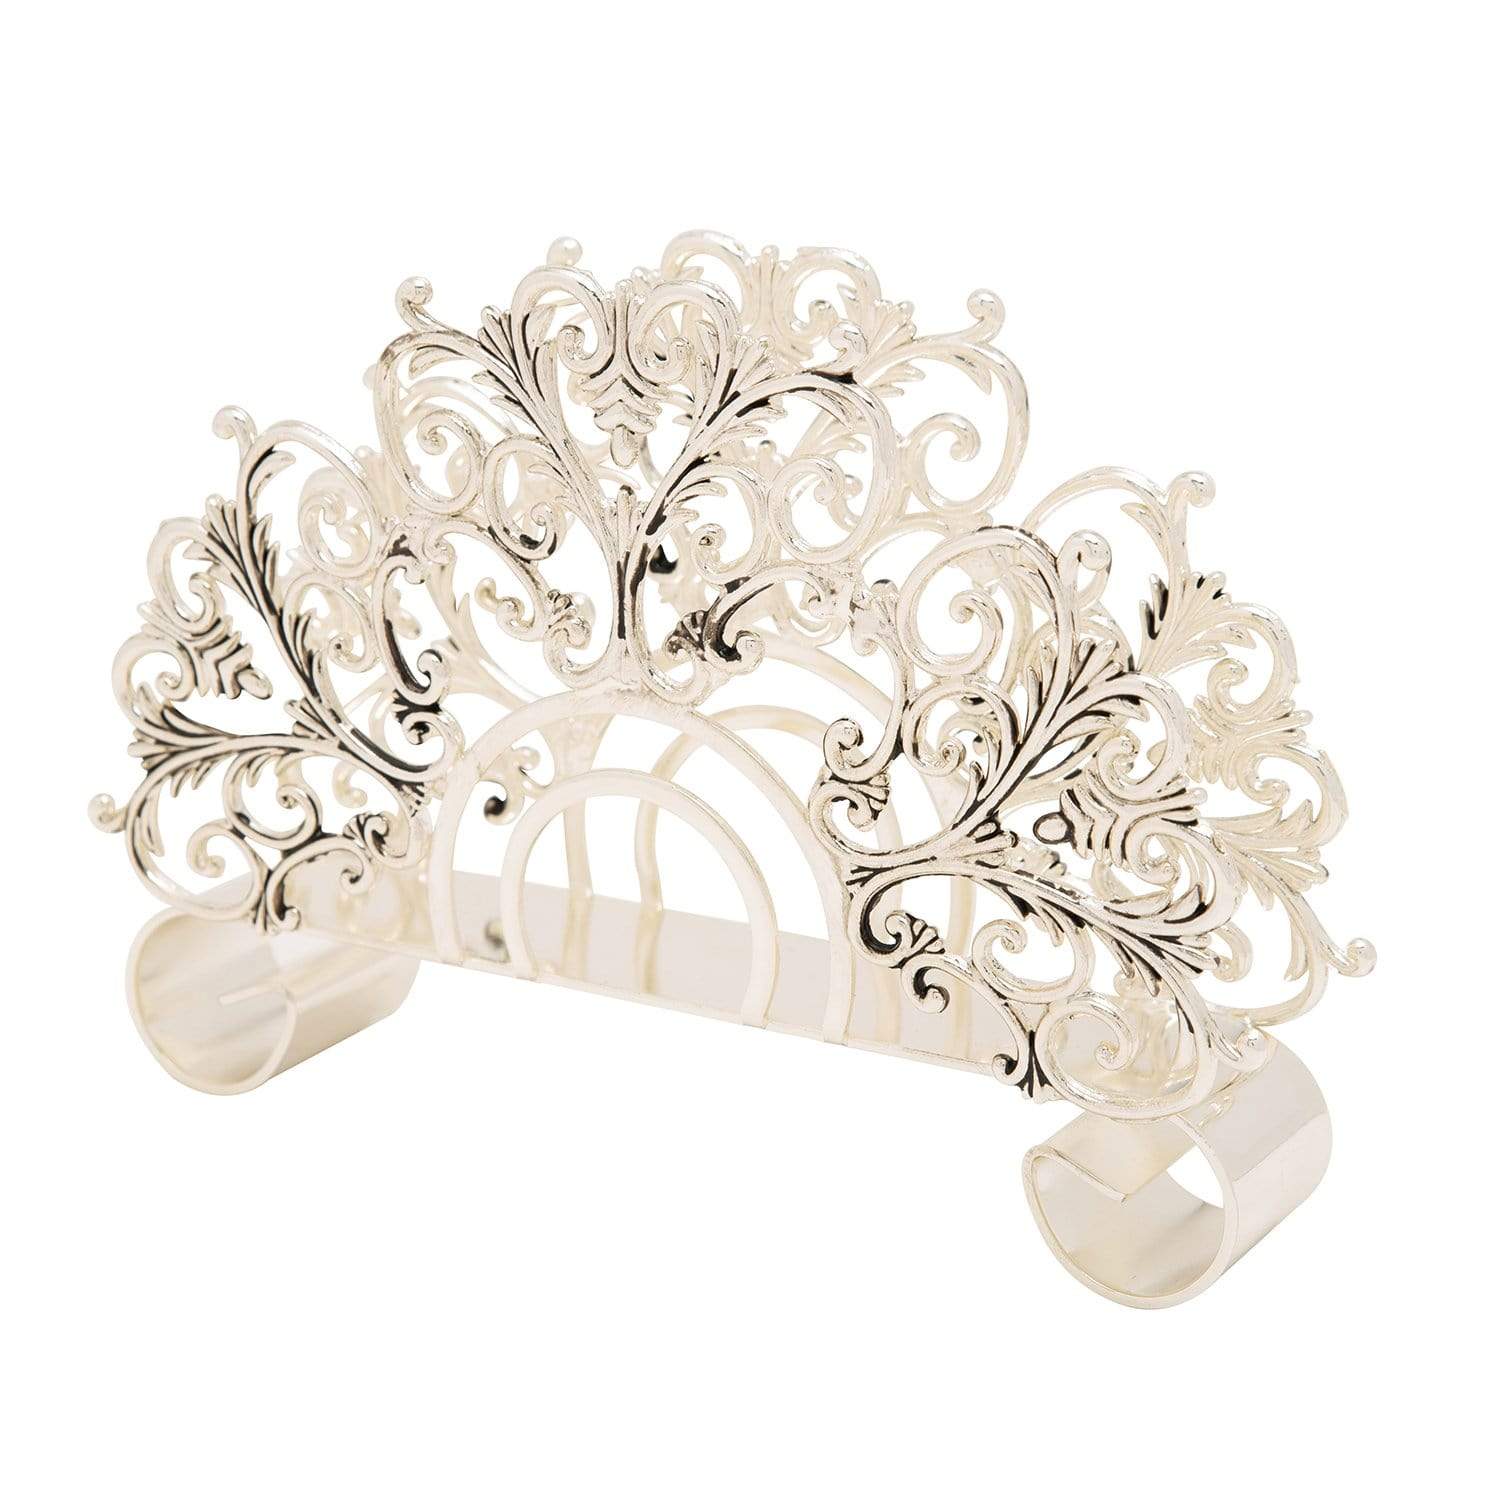 SILVER PLATED NAPKIN HOLDER